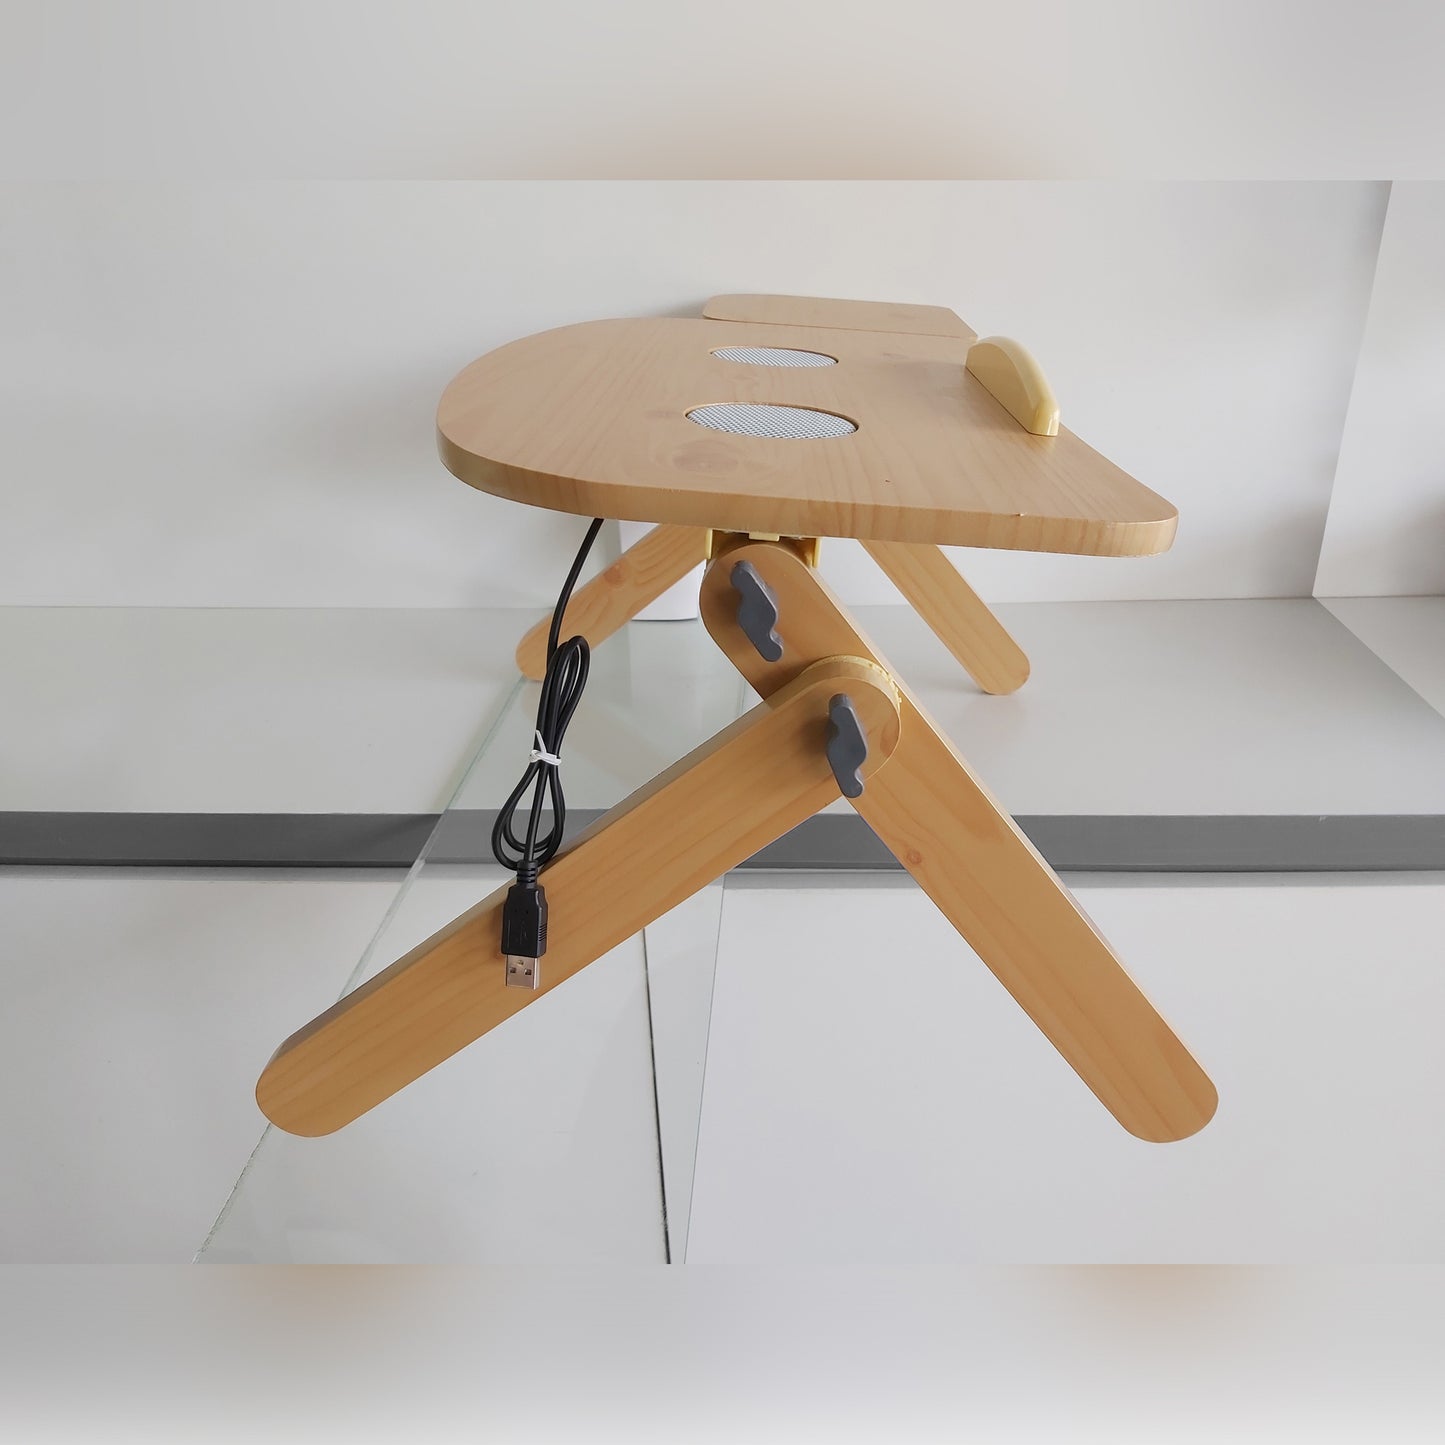 Portable Cooling Laptop Table (Brand New)